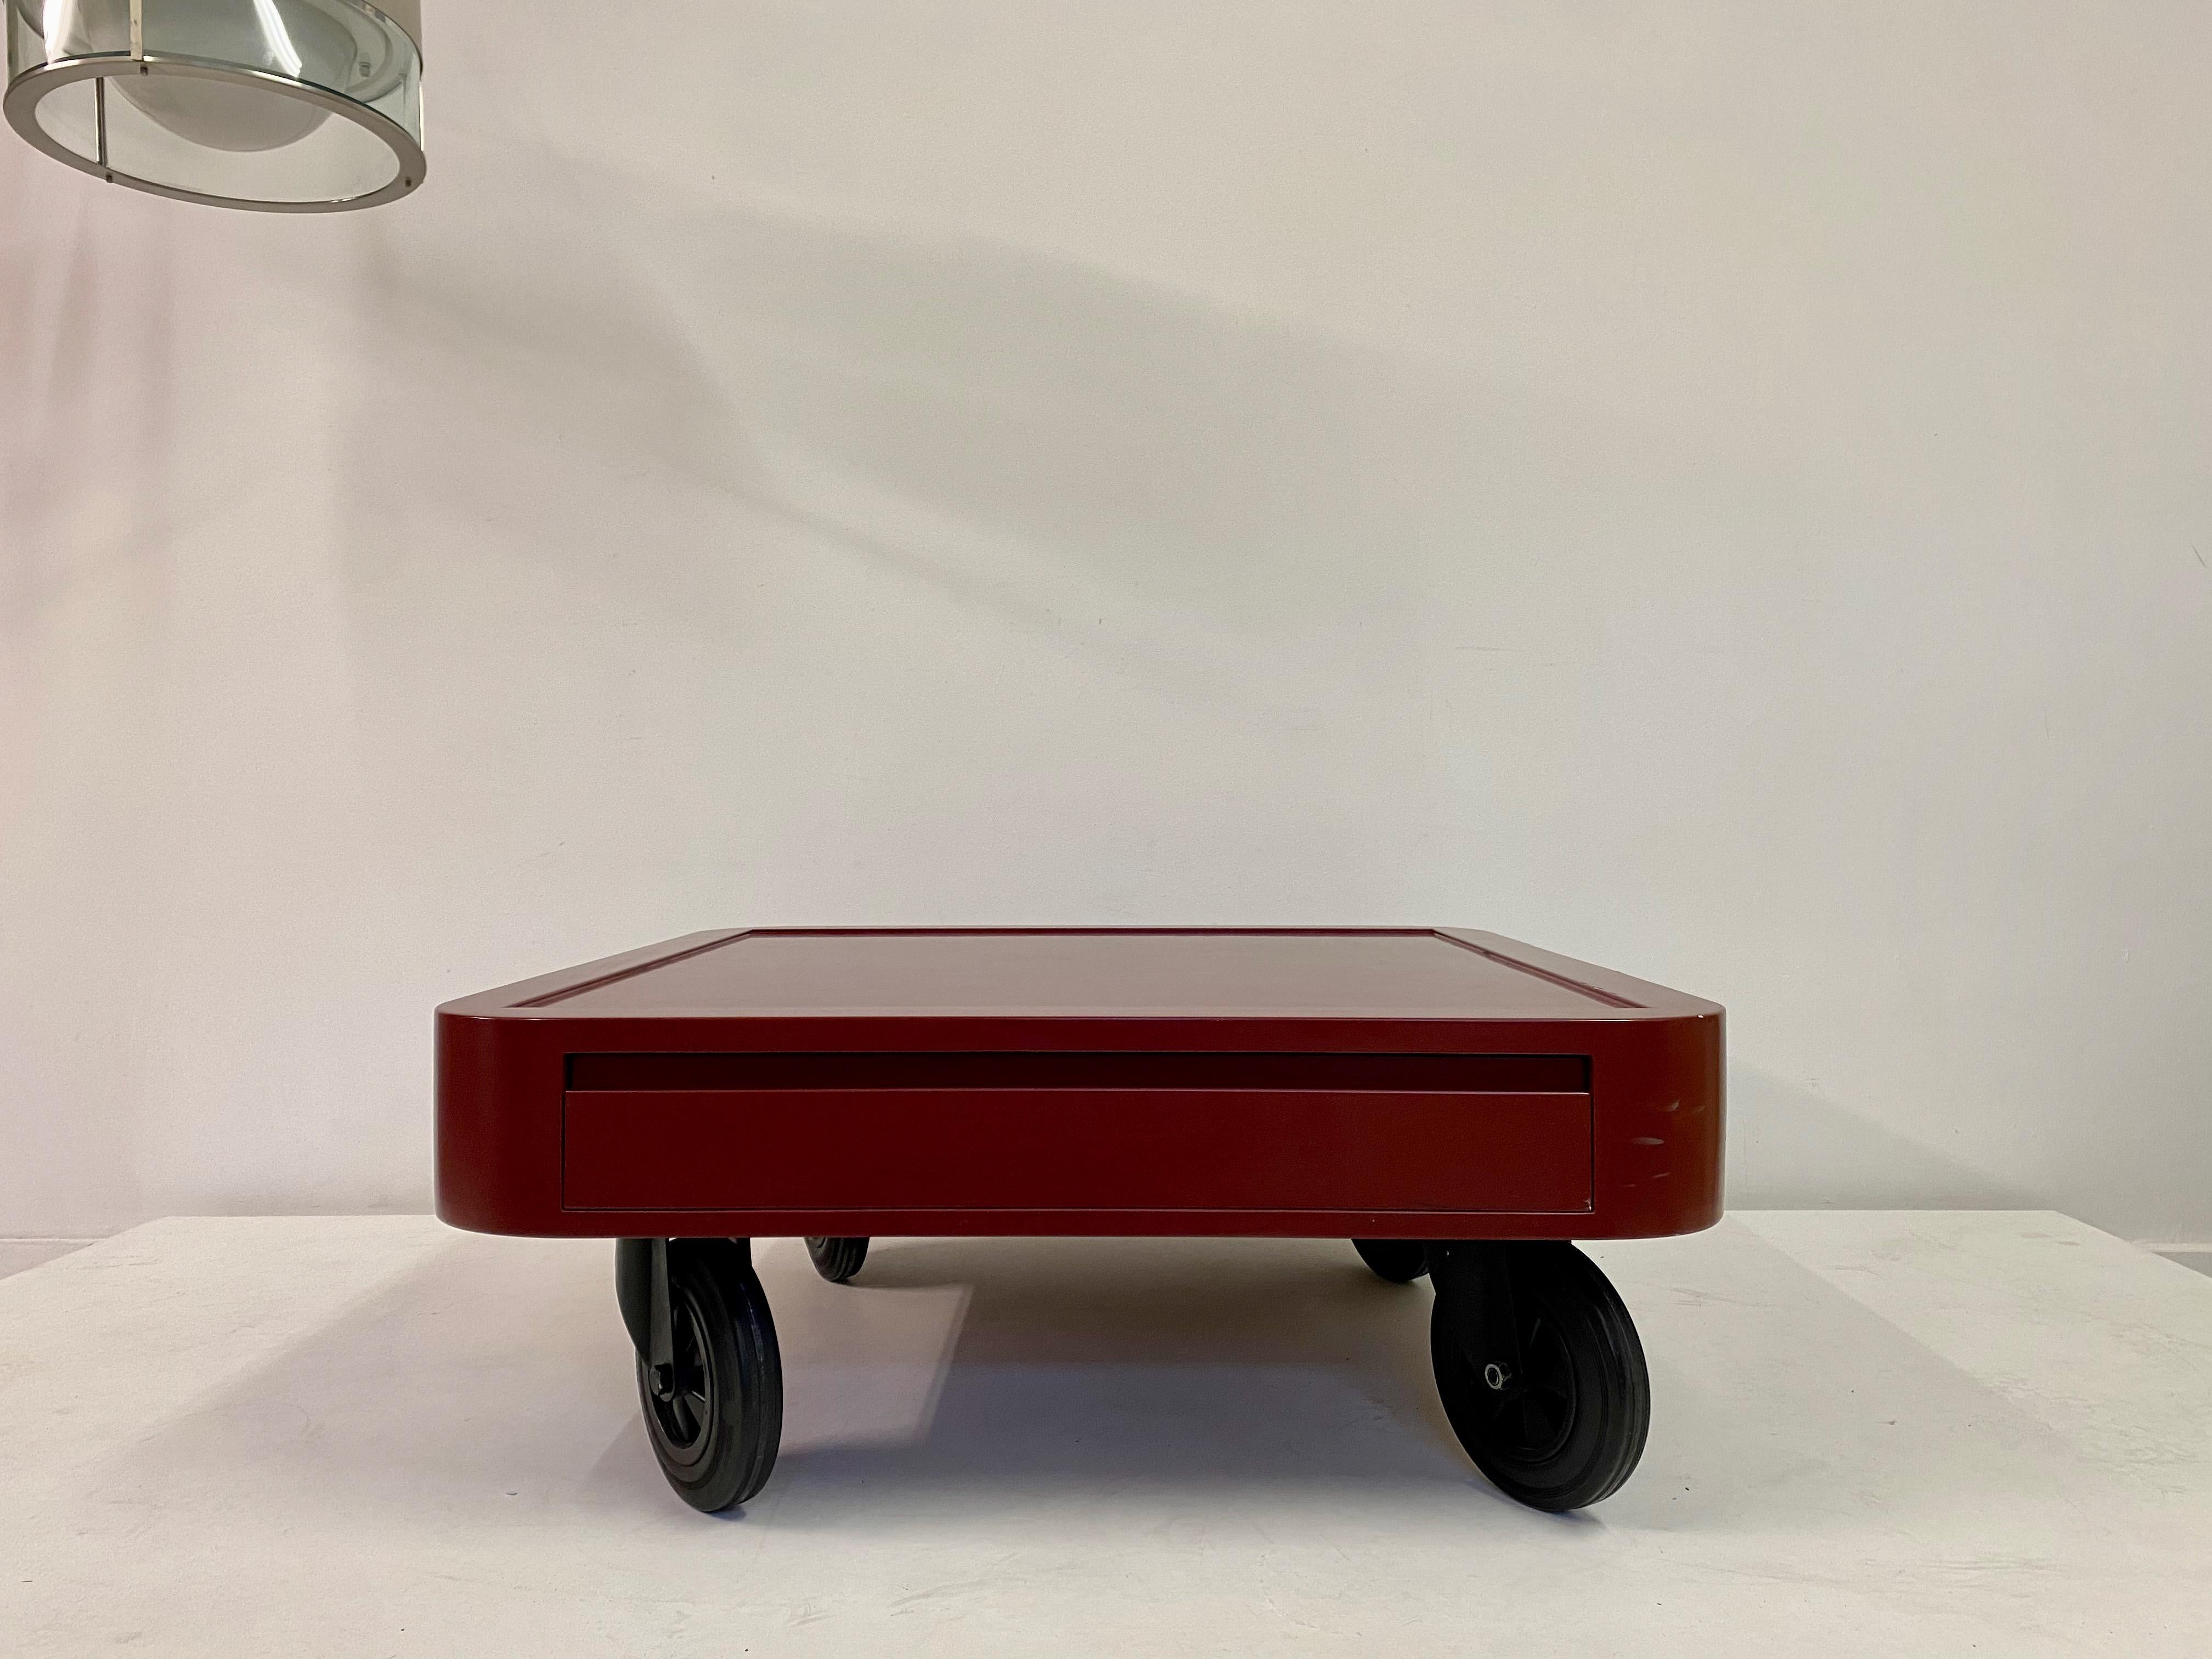 Coffee table

On rubber wheels

Red laminate

One drawer

Italy, 1980s.